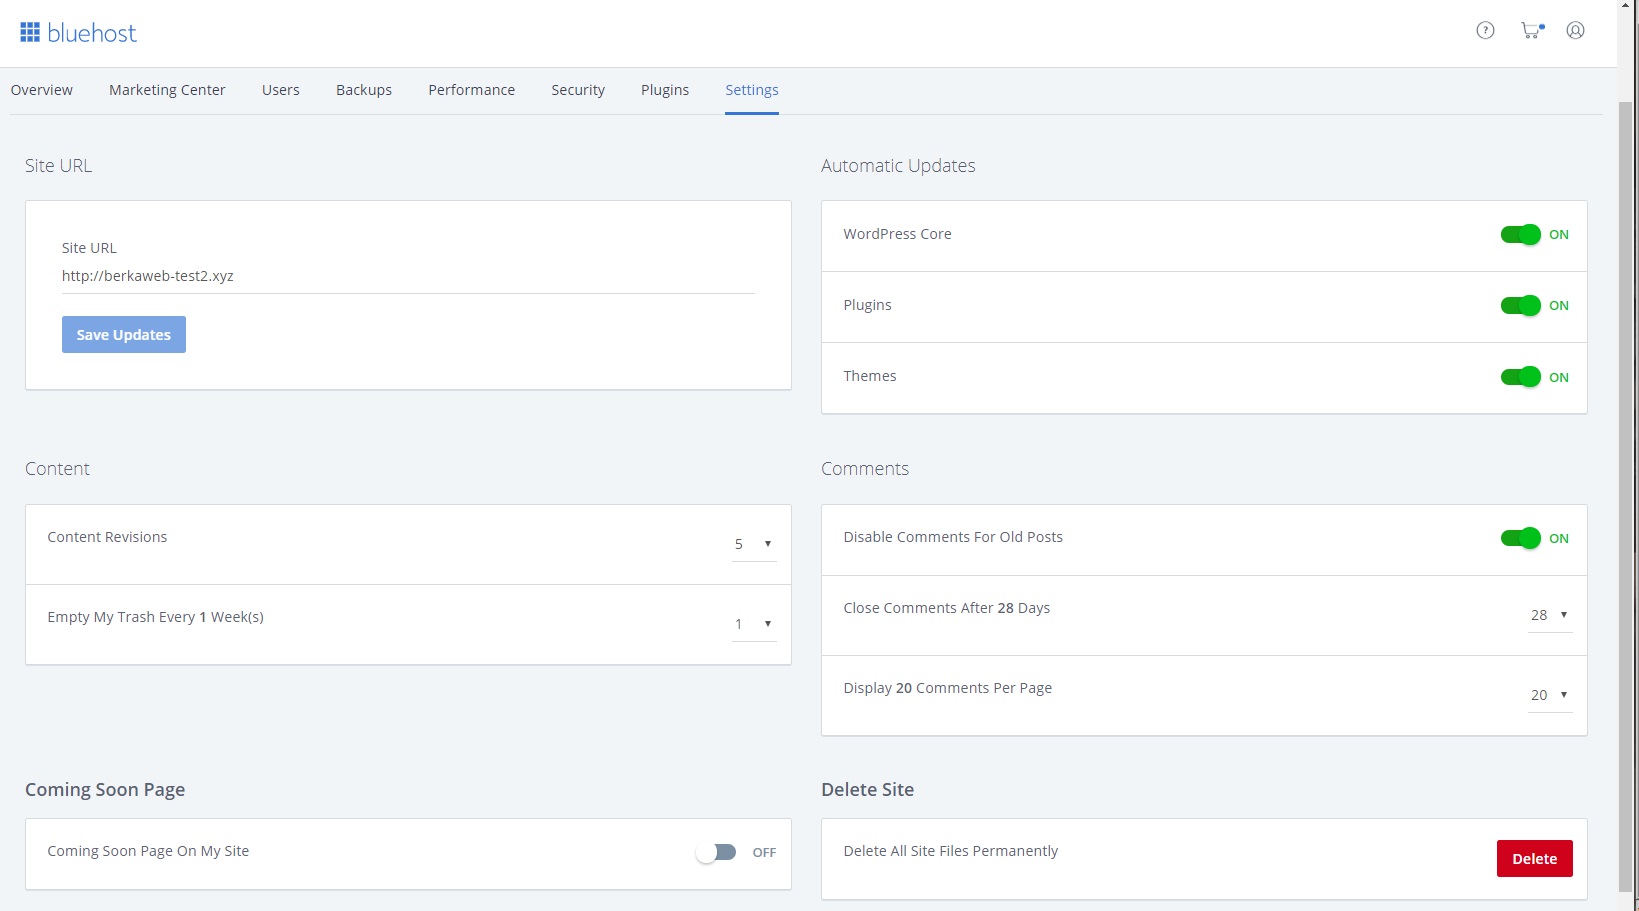 Bluehost shared hosting - interface - settings